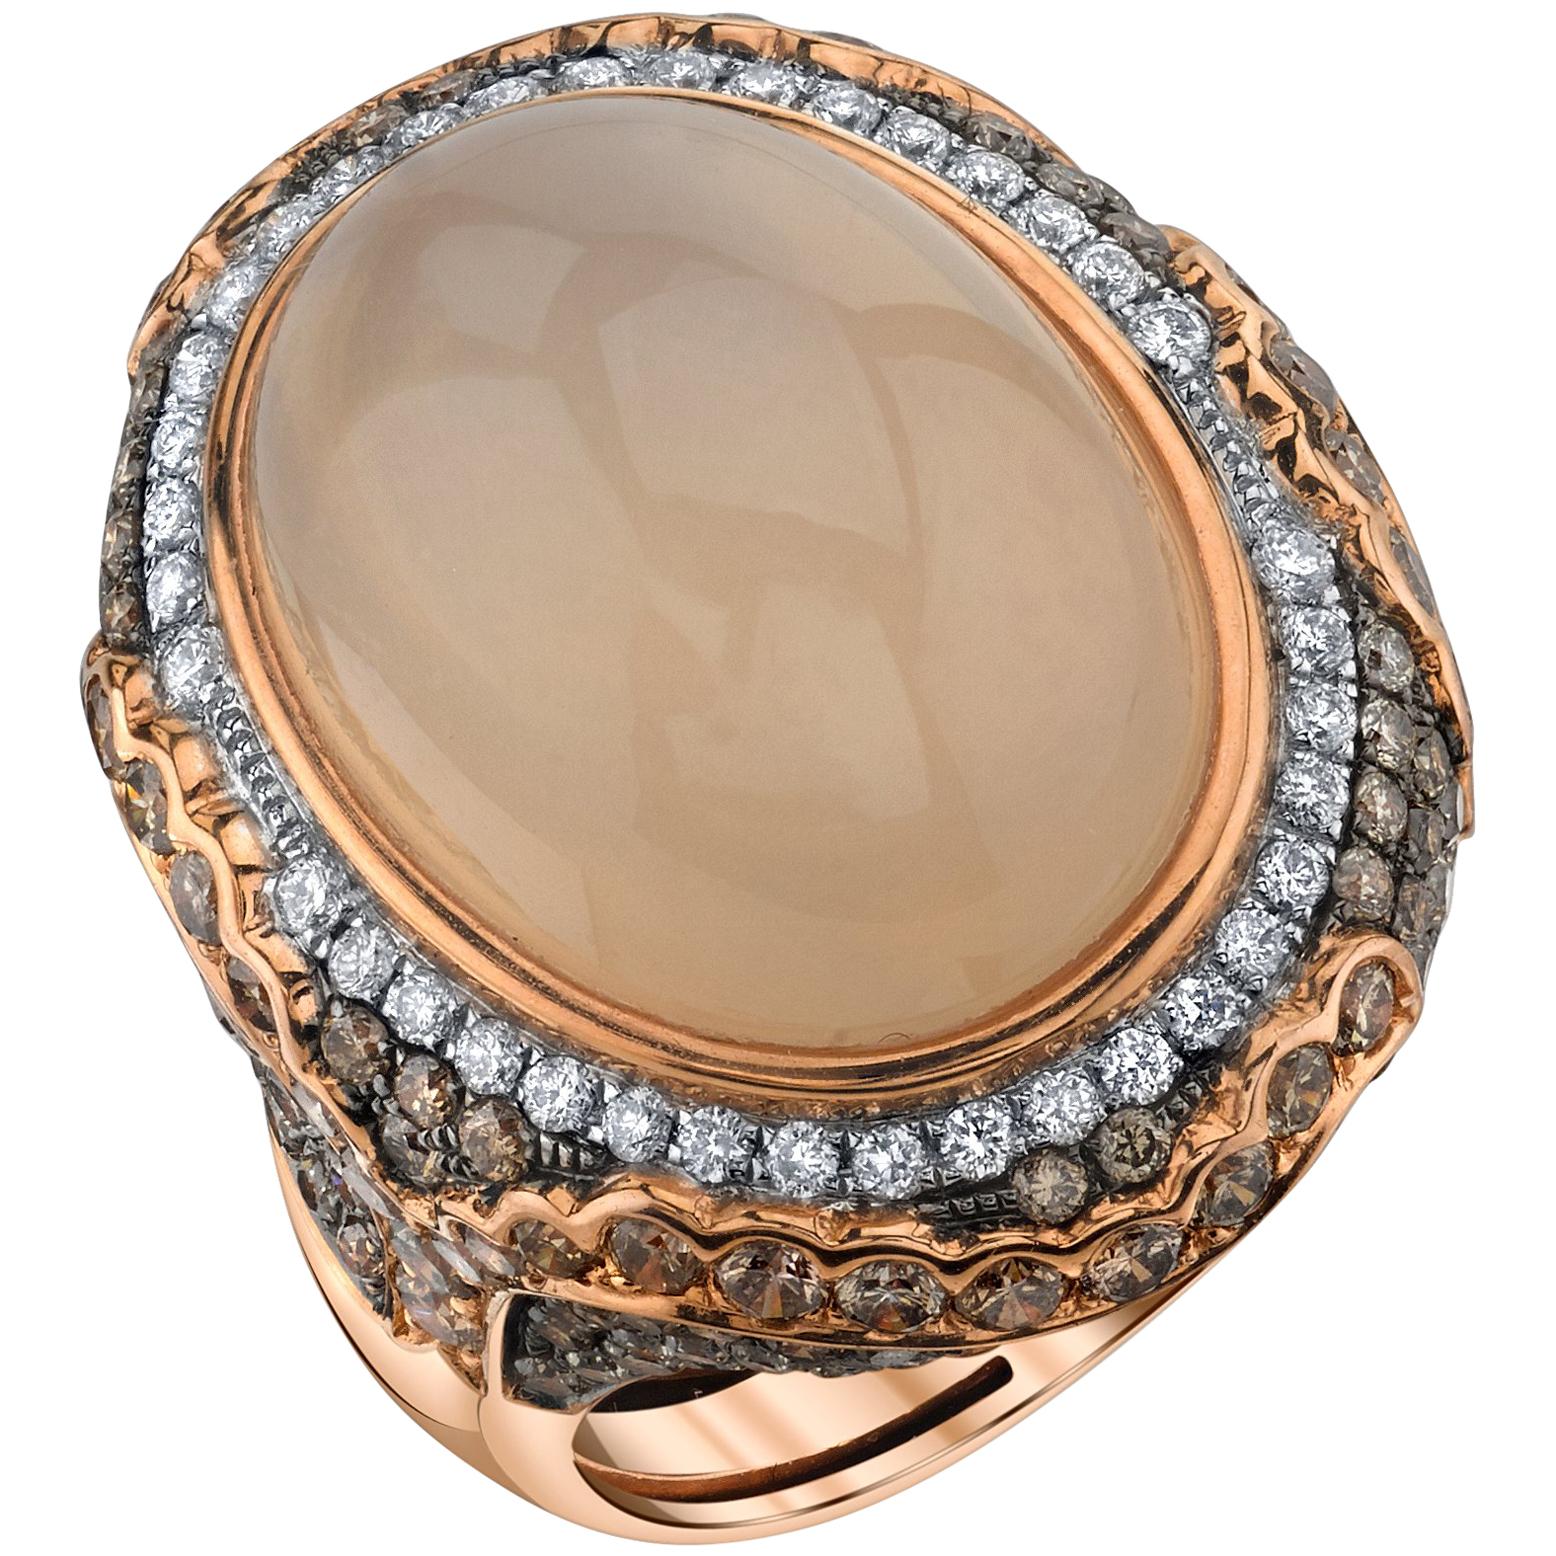 15.05 Carat Oval Moonstone with White and Brown Diamonds 18 Karat Rose Gold Ring